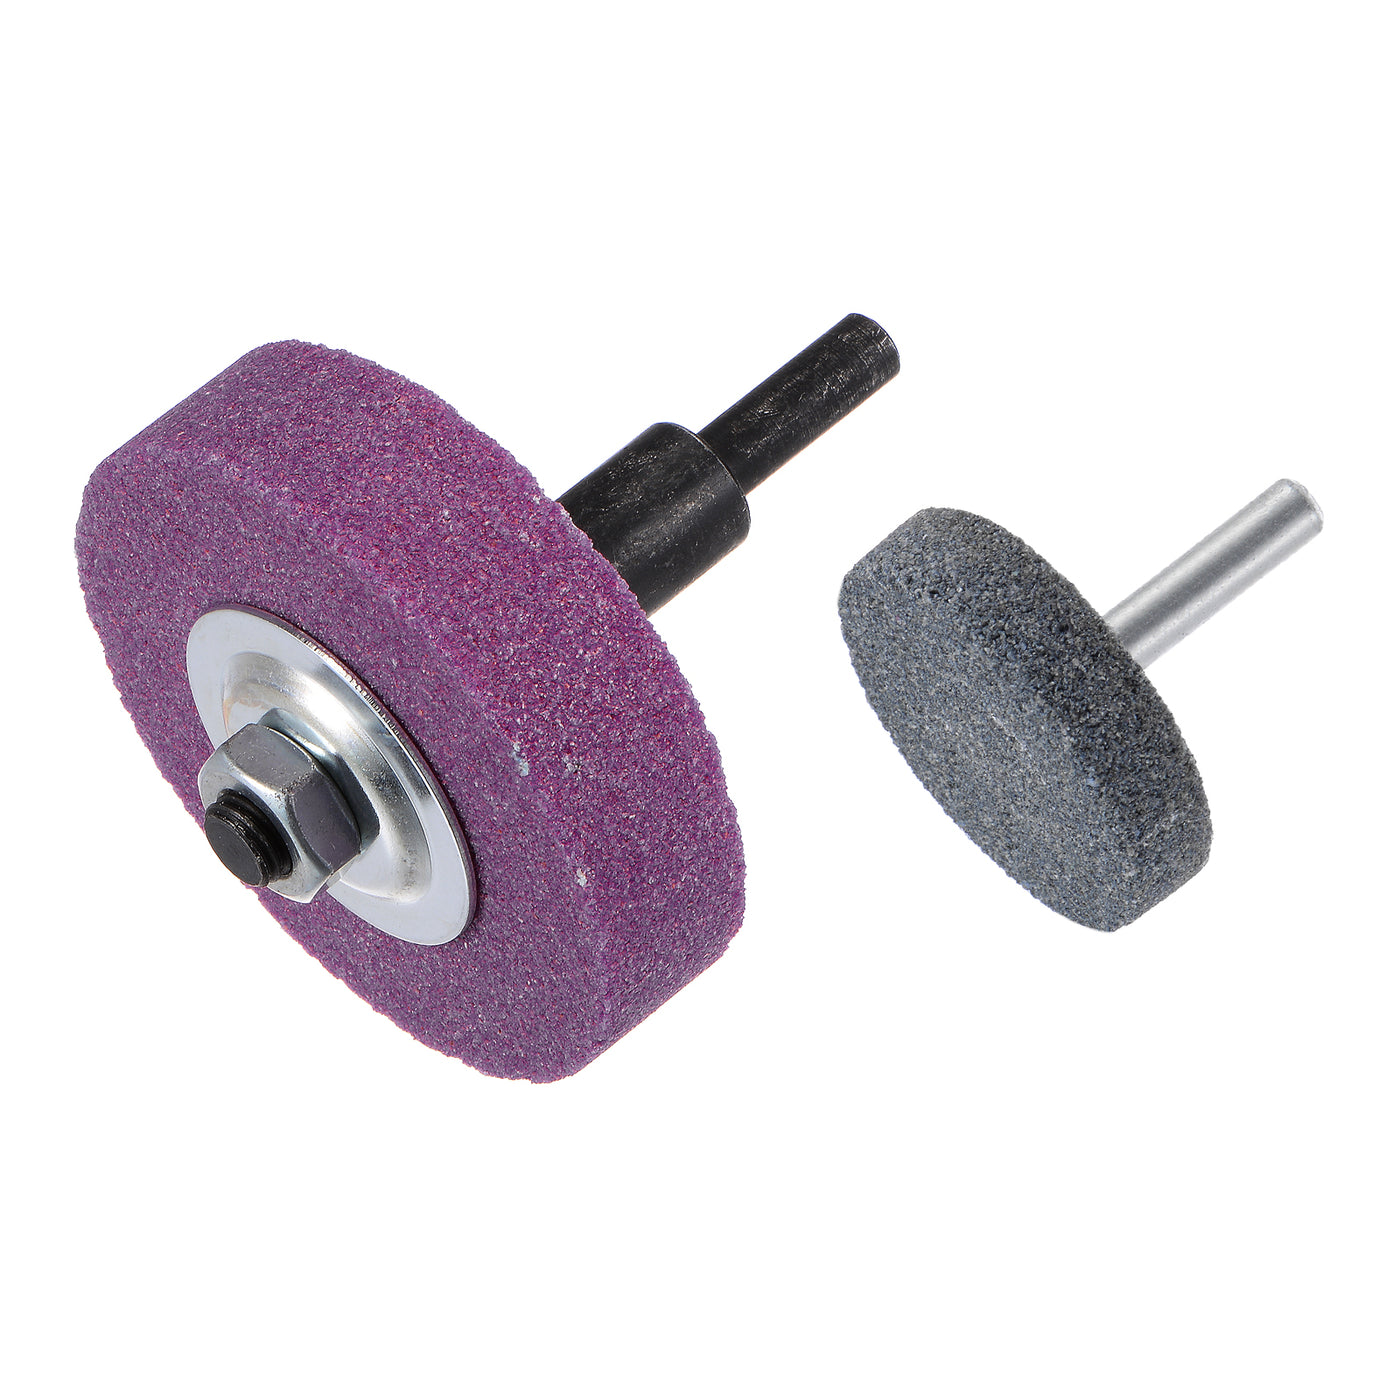 Uxcell Uxcell Mounted Grinding Stone 1.5-inch & 3-inch Dia Corundum Grinding Wheel